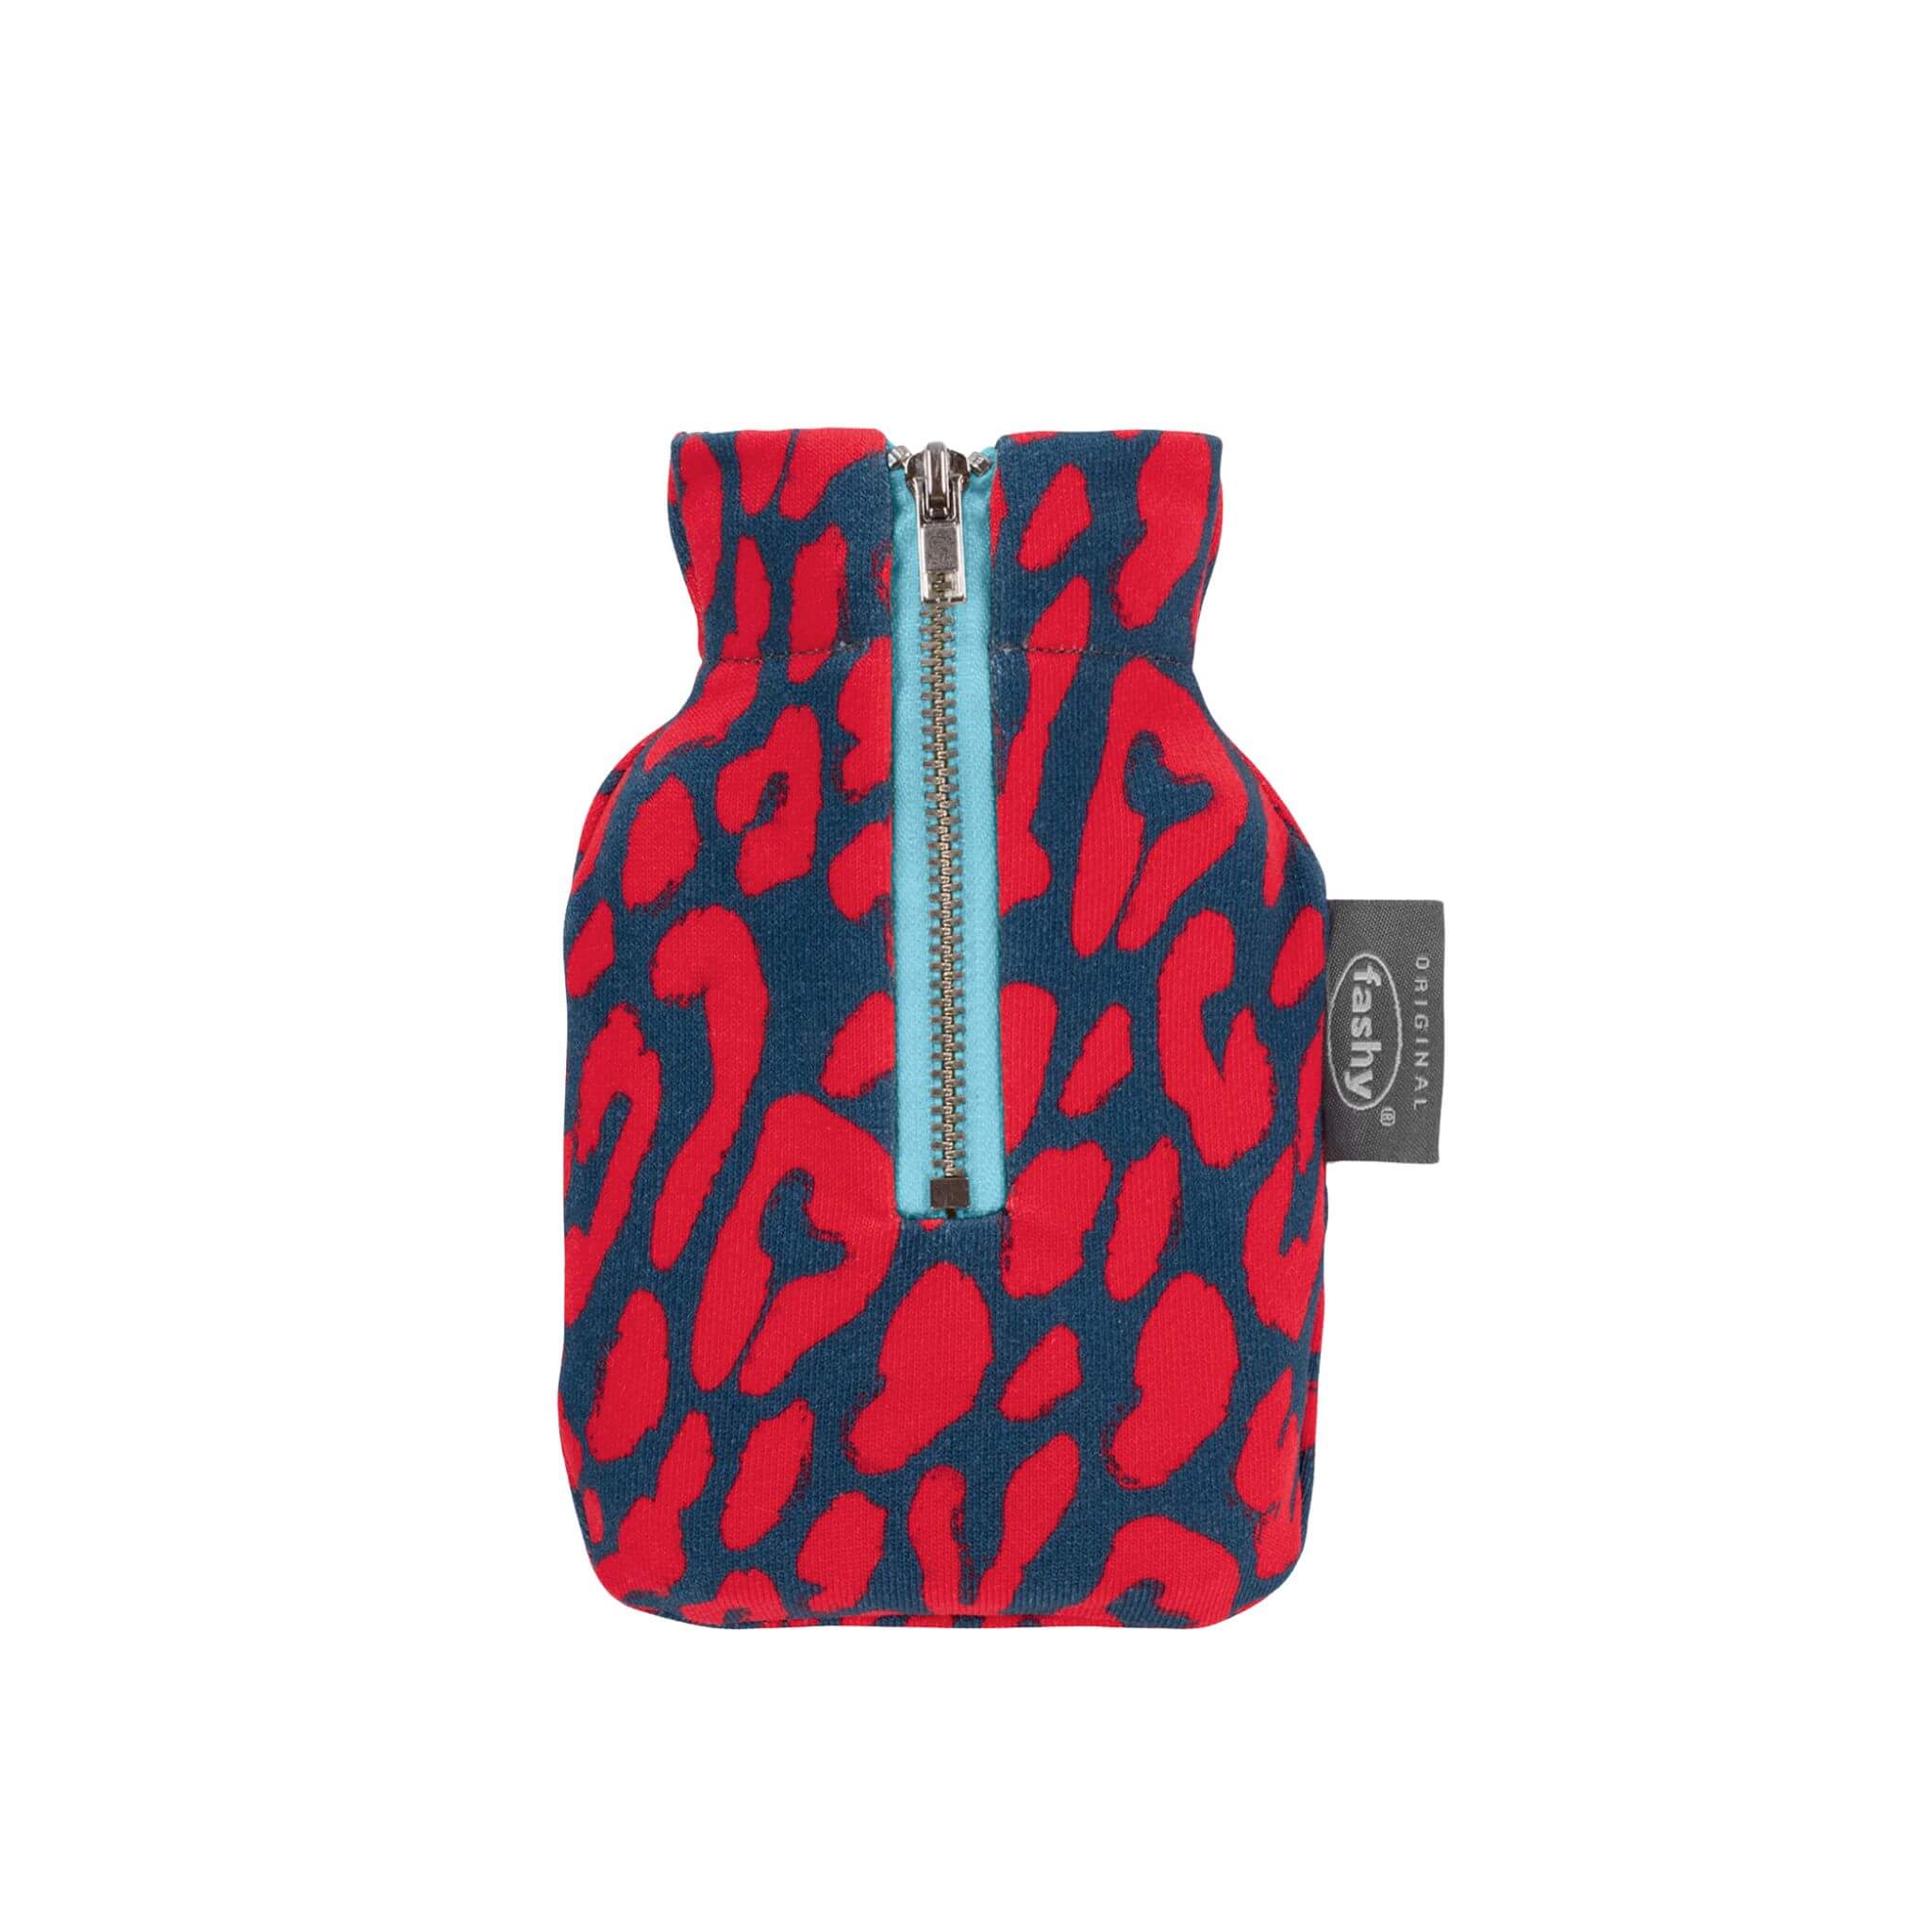 0.3 Litre Mini Hot Water Bottle Pocket Warmer with Blue and Red Leo Pattern Zip Cover